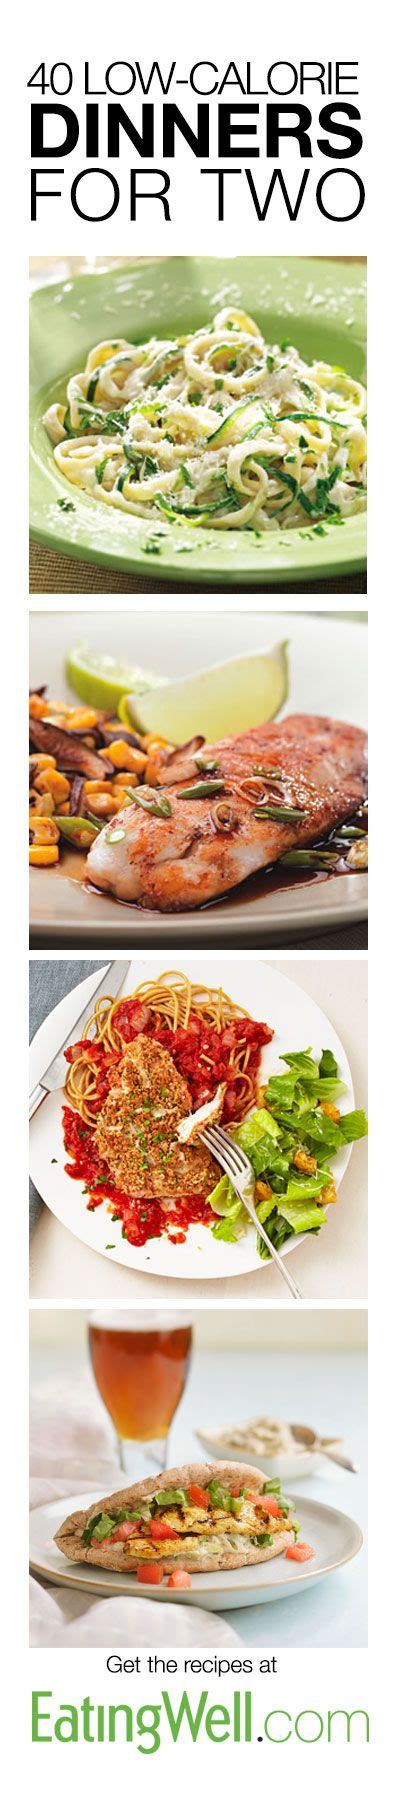 Our most trusted low calorie dinner recipes. 21 Of the Best Ideas for Low Calorie Dinners for Two - Best Round Up Recipe Collections